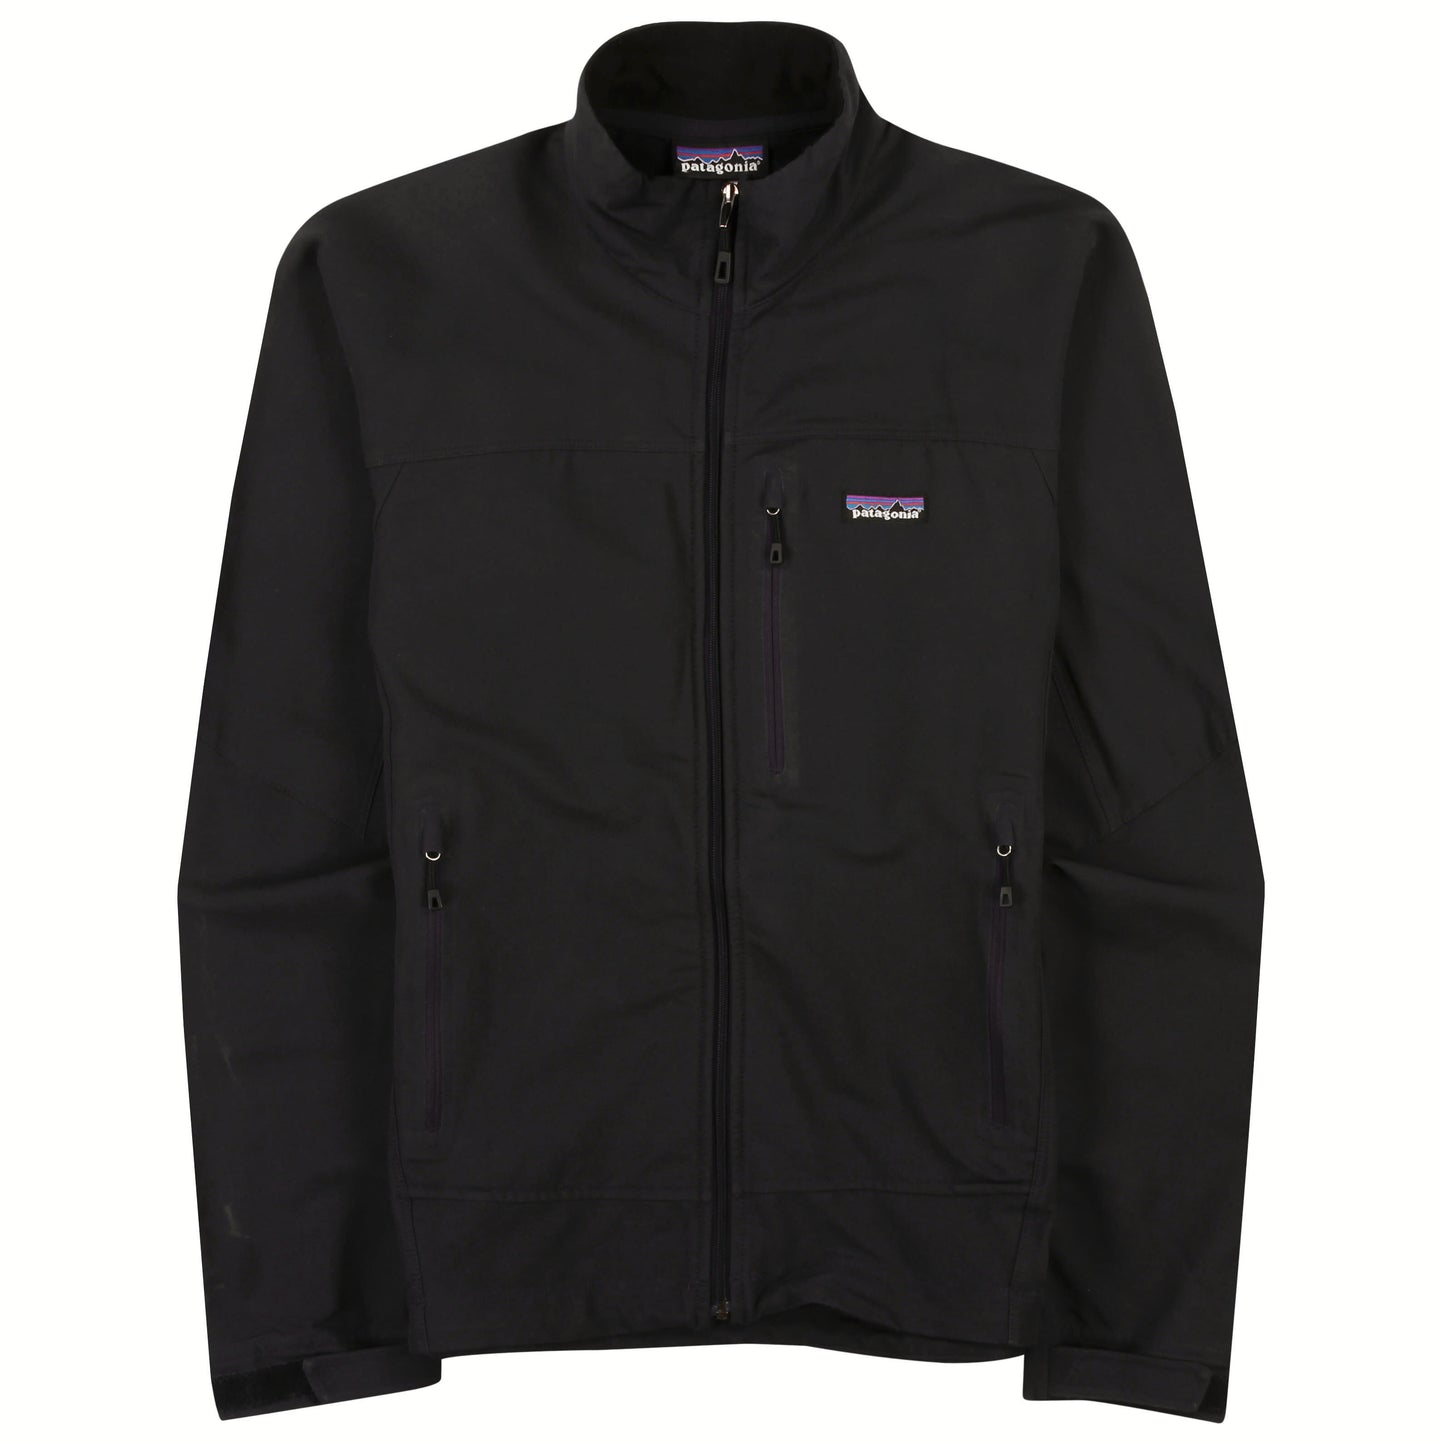 M's Simple Guide Jacket